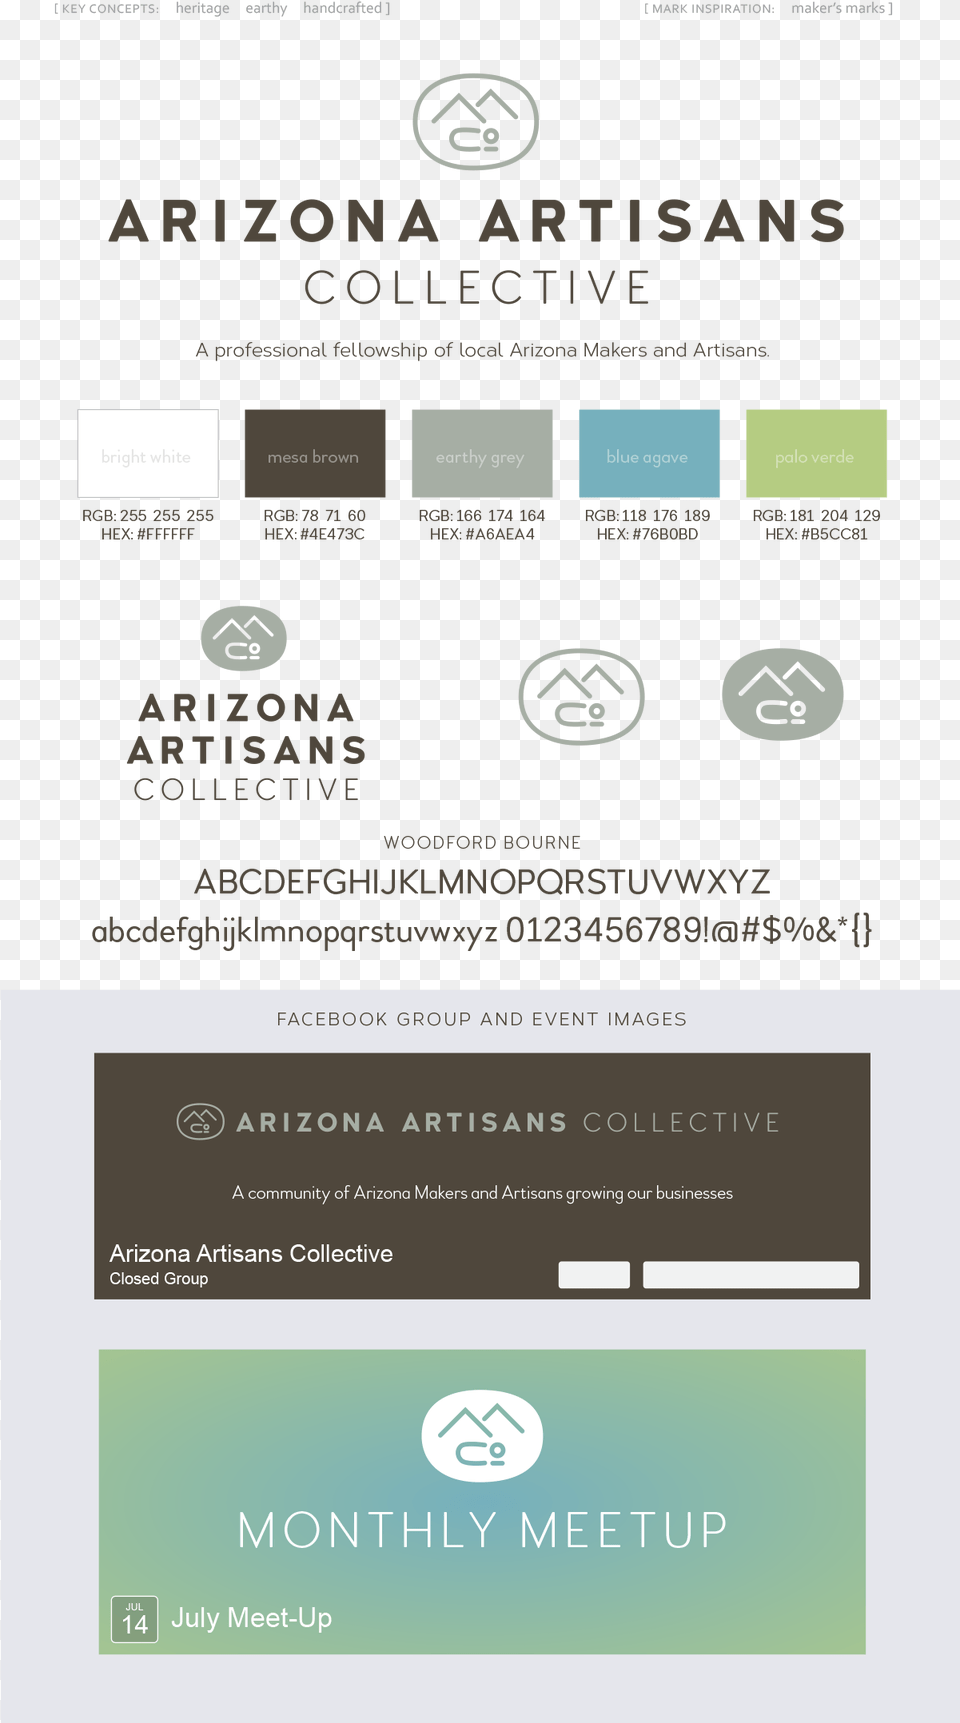 Arizona Artisans Collective Makers Mark Logo And Branding, Advertisement, Poster Png Image